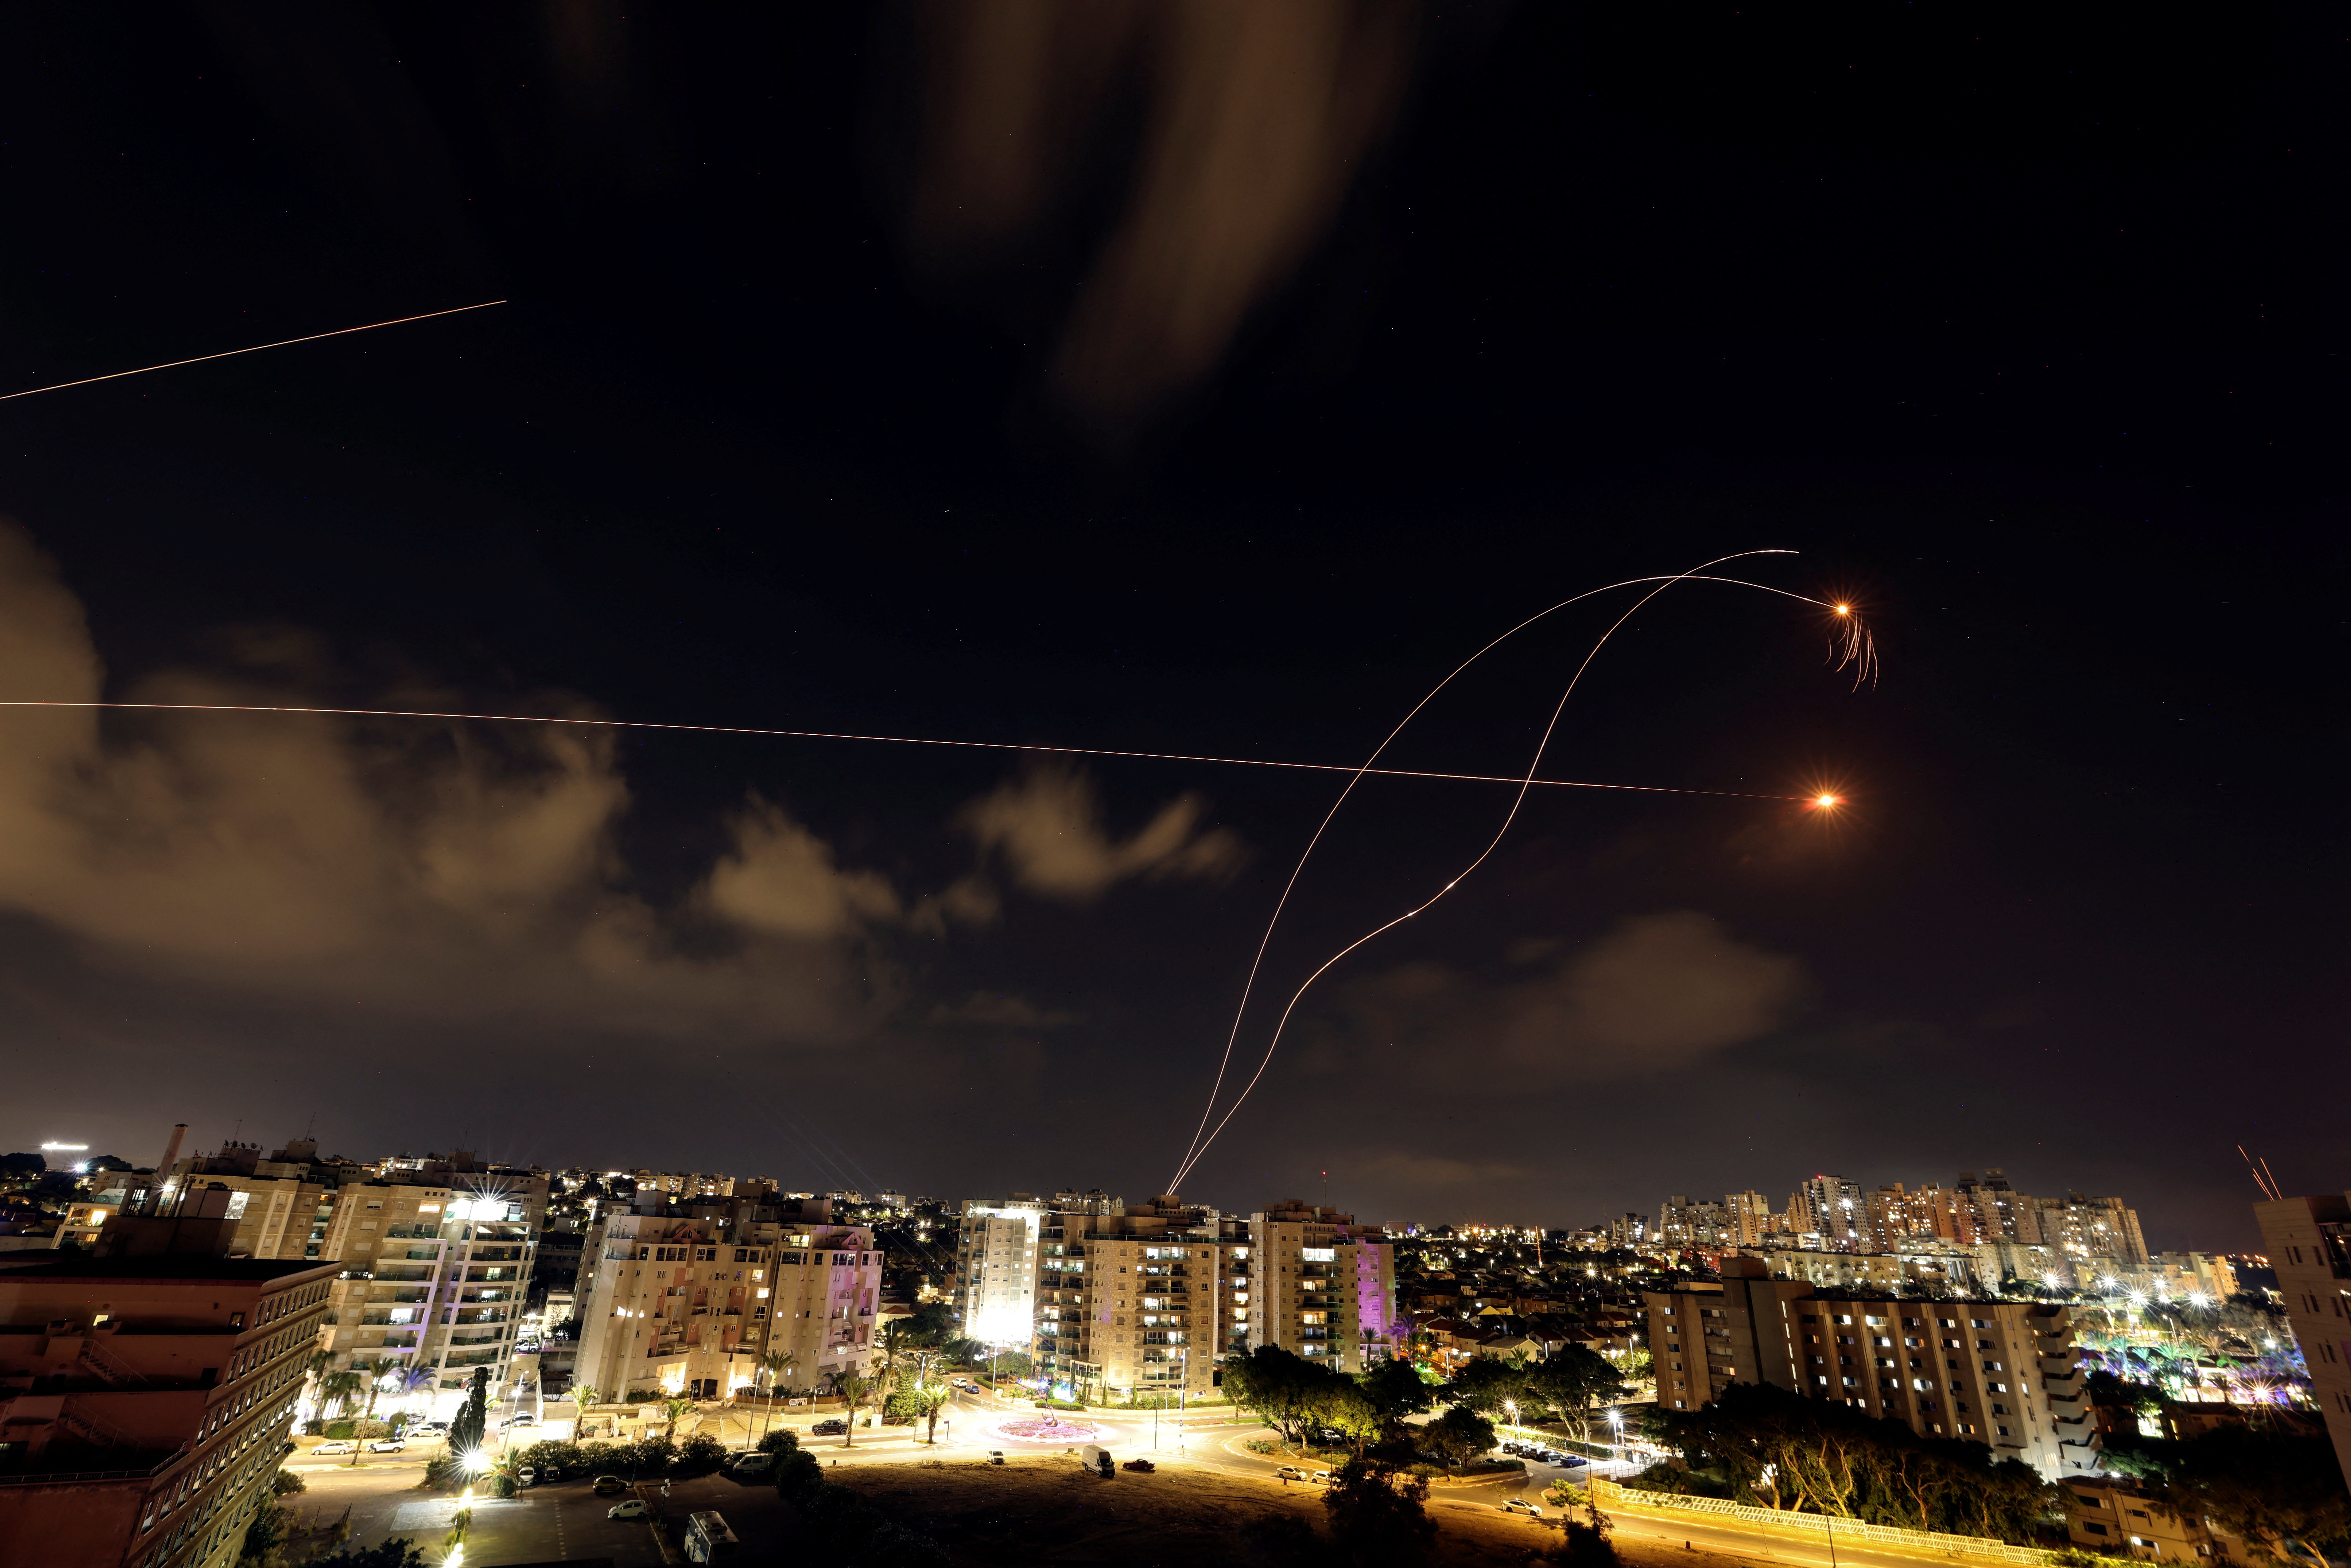 Israel's Iron Dome anti-missile system intercepts rockets launched from Gaza Strip, as seen from Ashkelon